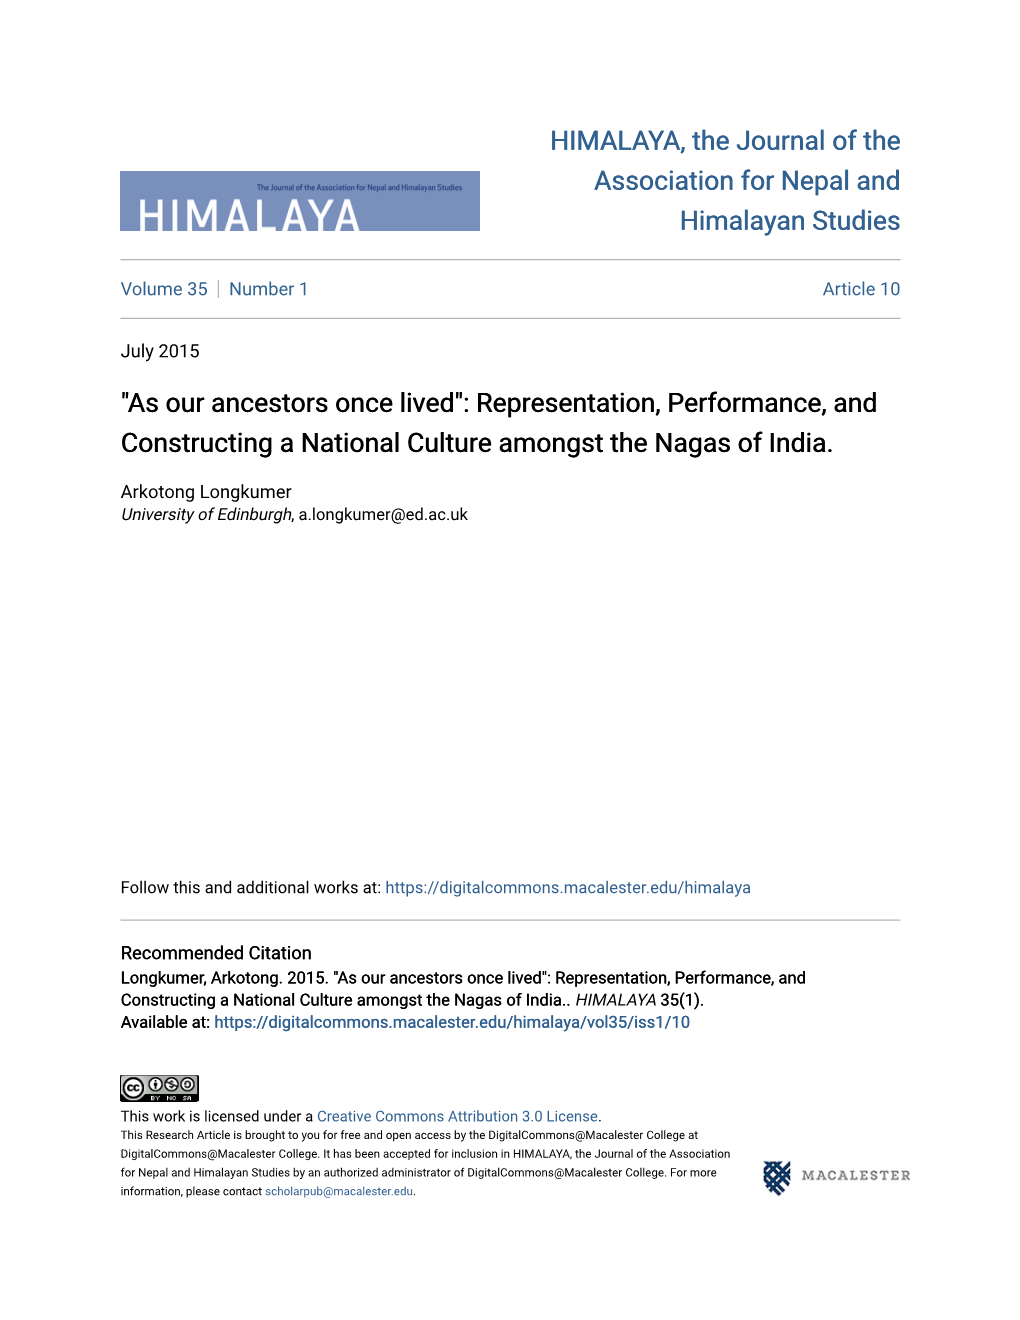 Representation, Performance, and Constructing a National Culture Amongst the Nagas of India